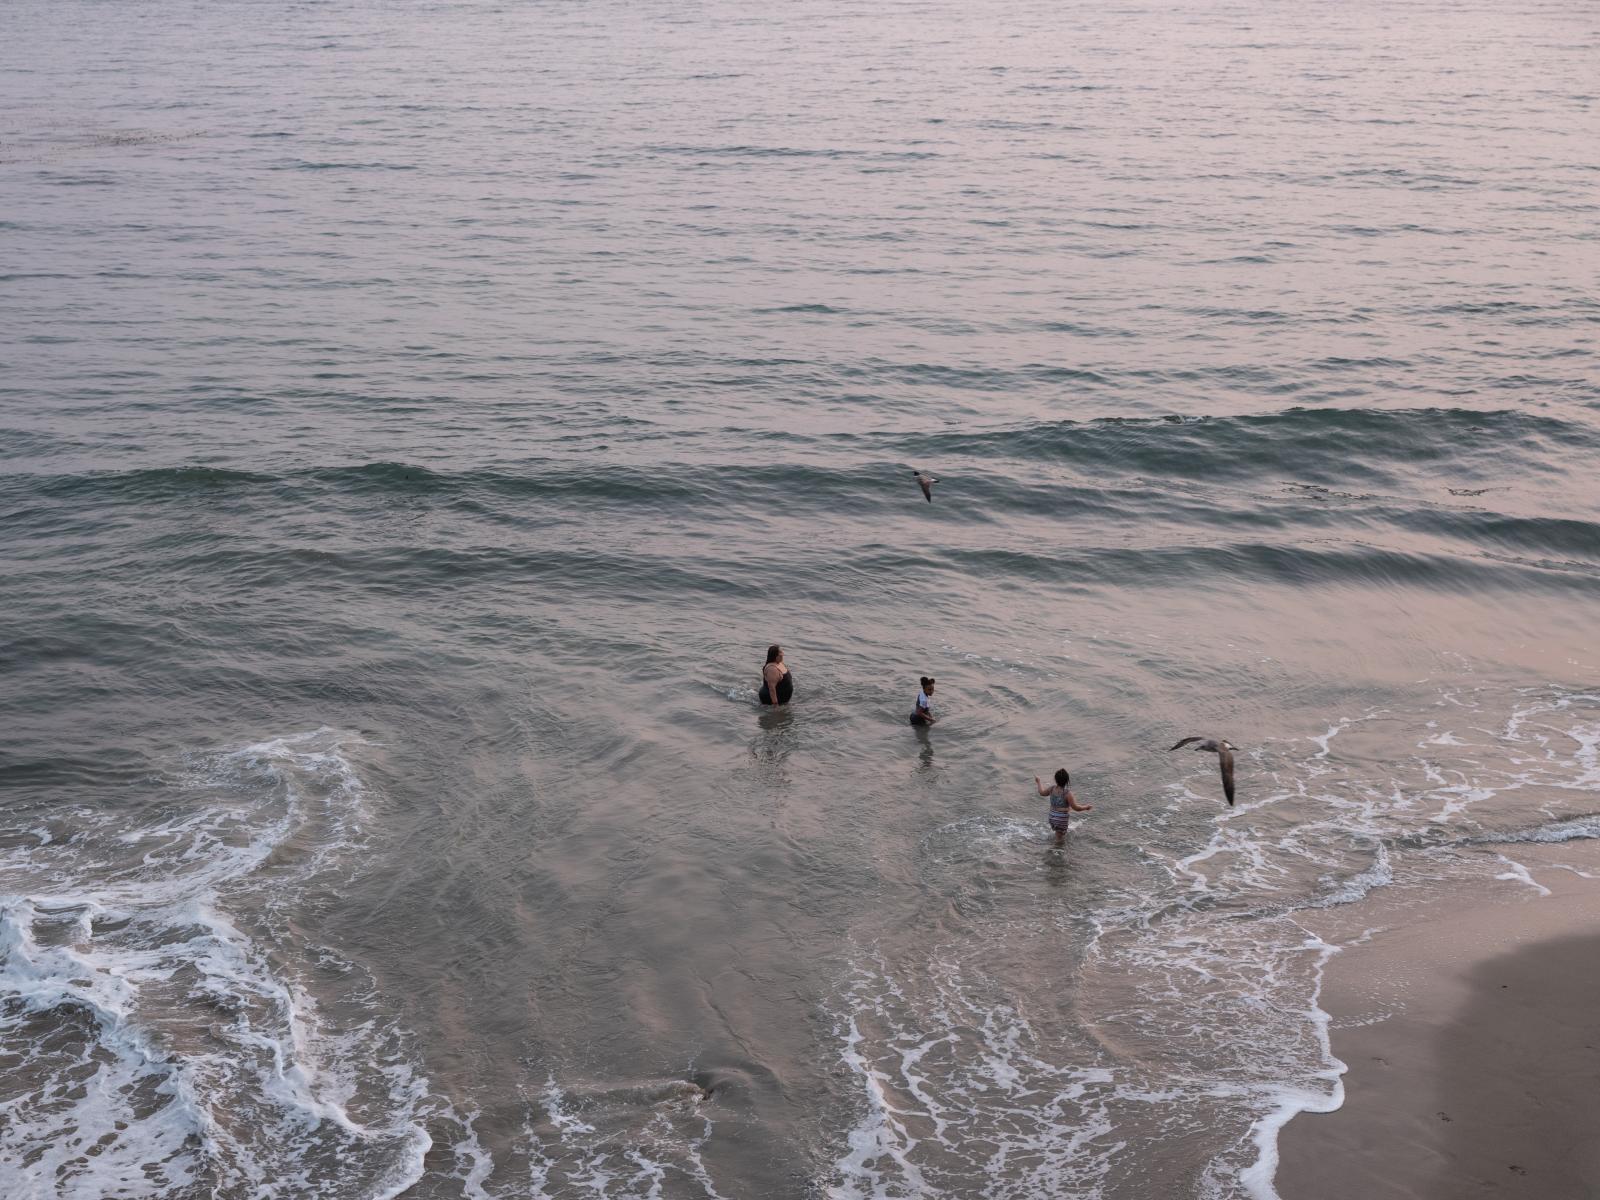 Swimmers | Buy this image